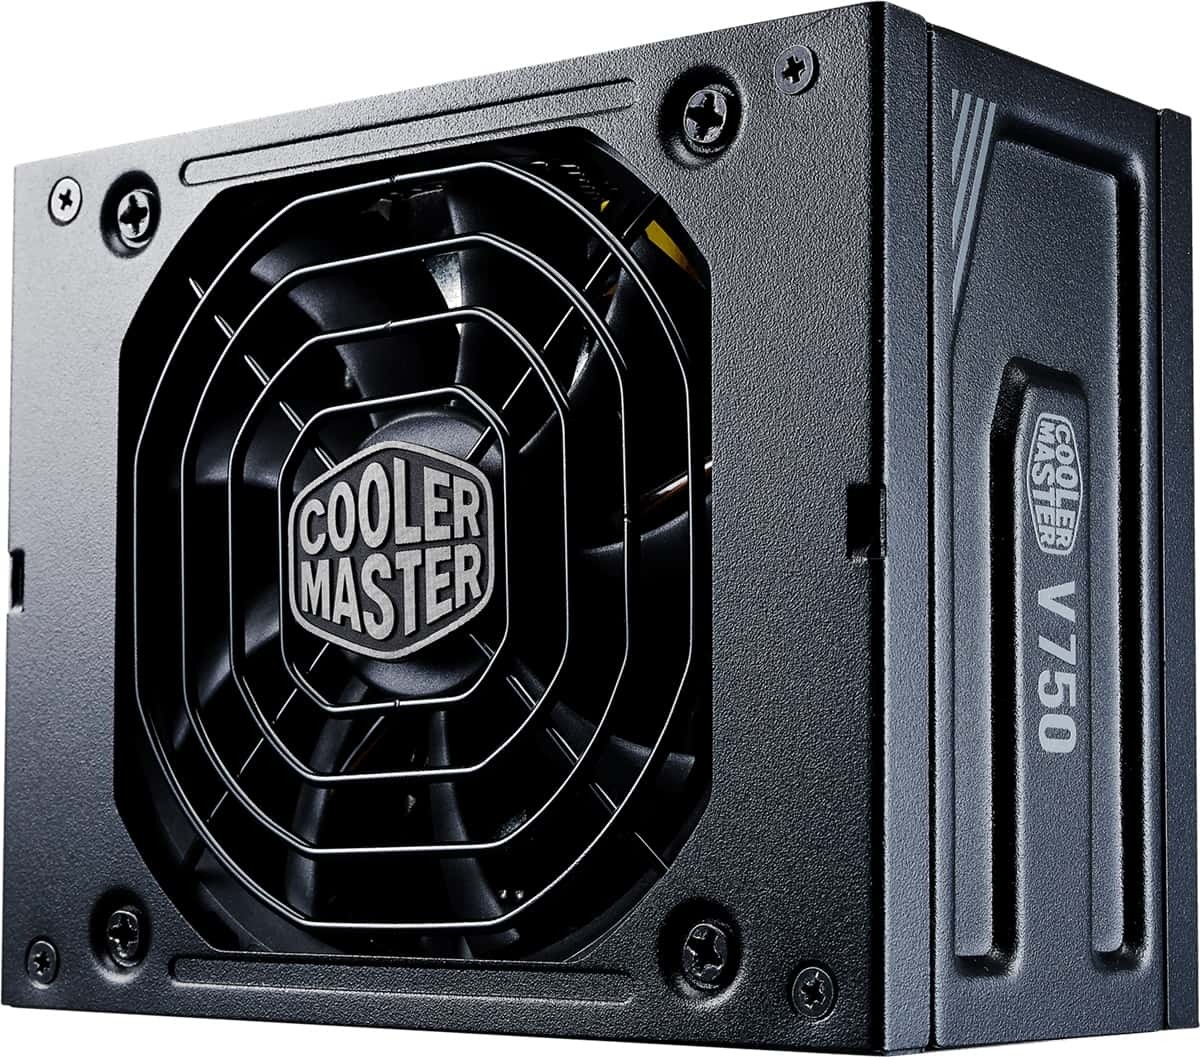 CM PSU V Gold 750W SFX; Fully Modular. Gold Rated; For SFX Chassis; has ATX Bracket included